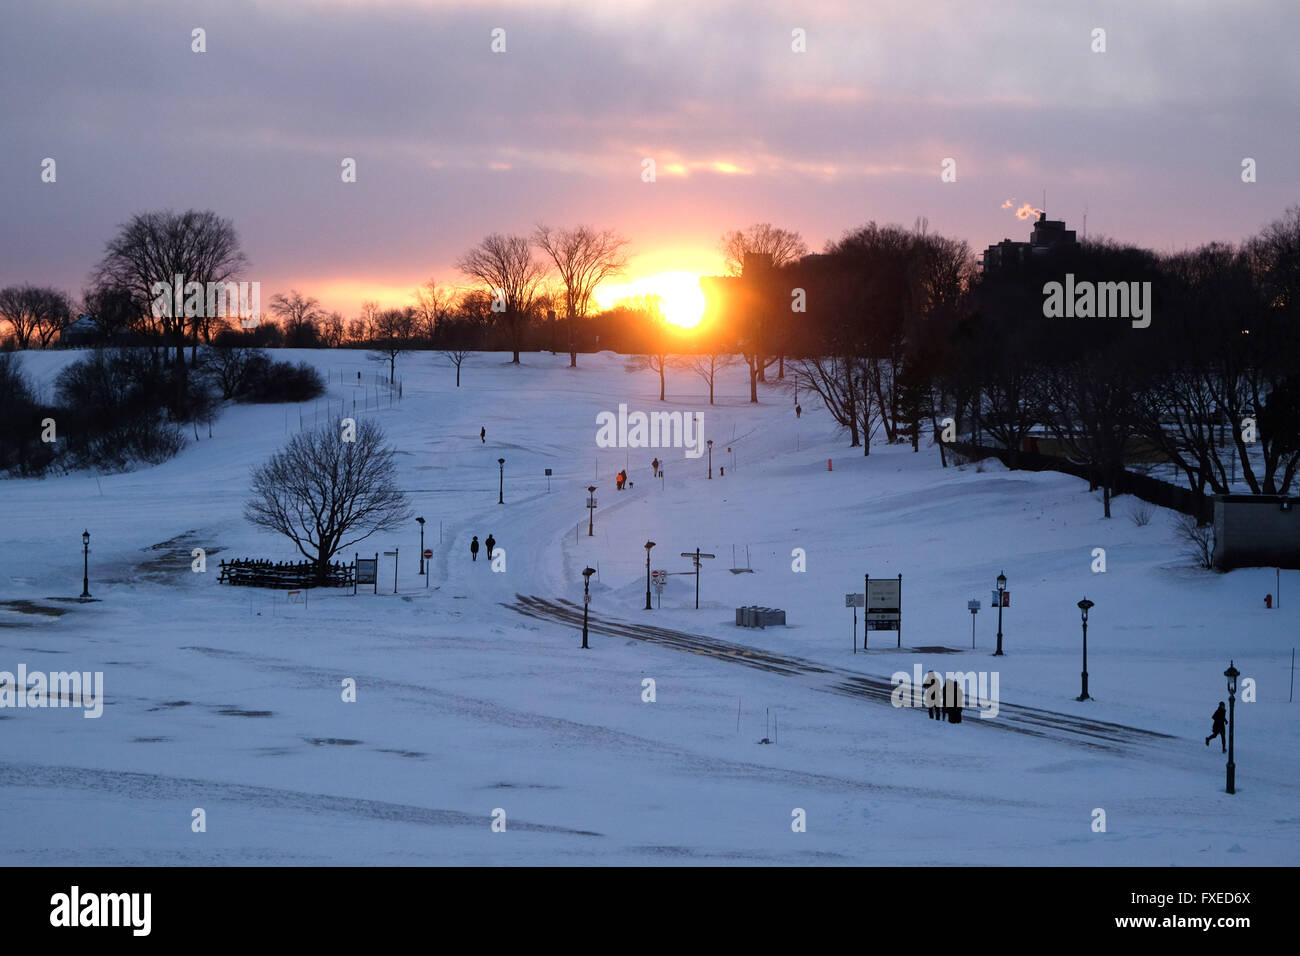 The sun sets over a snowy park in Quebec city, Quebec, Canada. Stock Photo